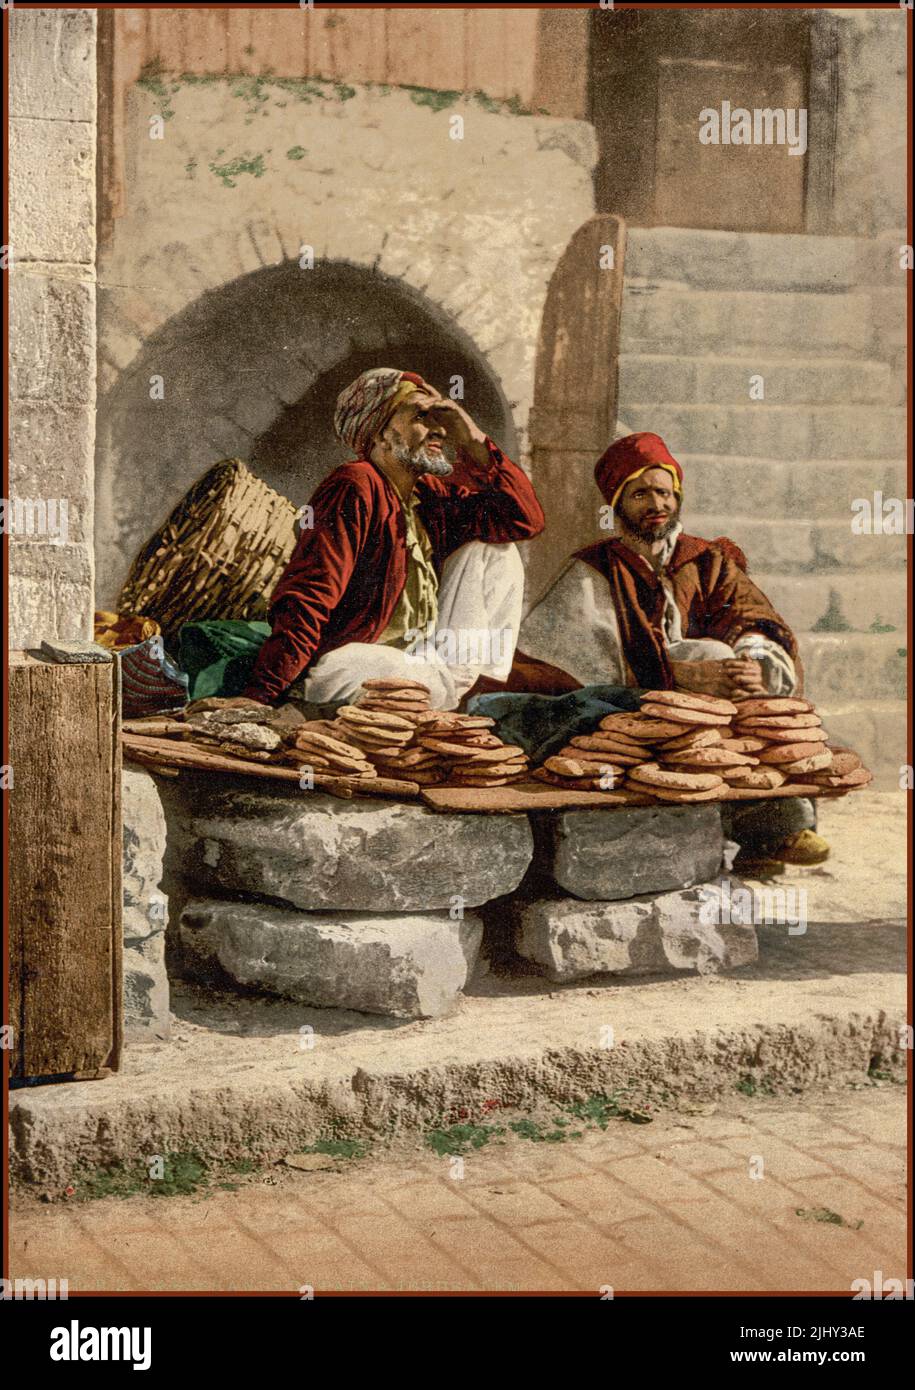 JERUSALEM Vintage Travel Food 1900s of Street Bread sellers of Arab Jerusalem, Holy Land Palestine Date between 1890 and 1900  Victorian photochrom image of street food bread seller color. One of the oldest cities in the world, and is considered holy for the three major Abrahamic religions: Judaism, Christianity, and Islam. Stock Photo